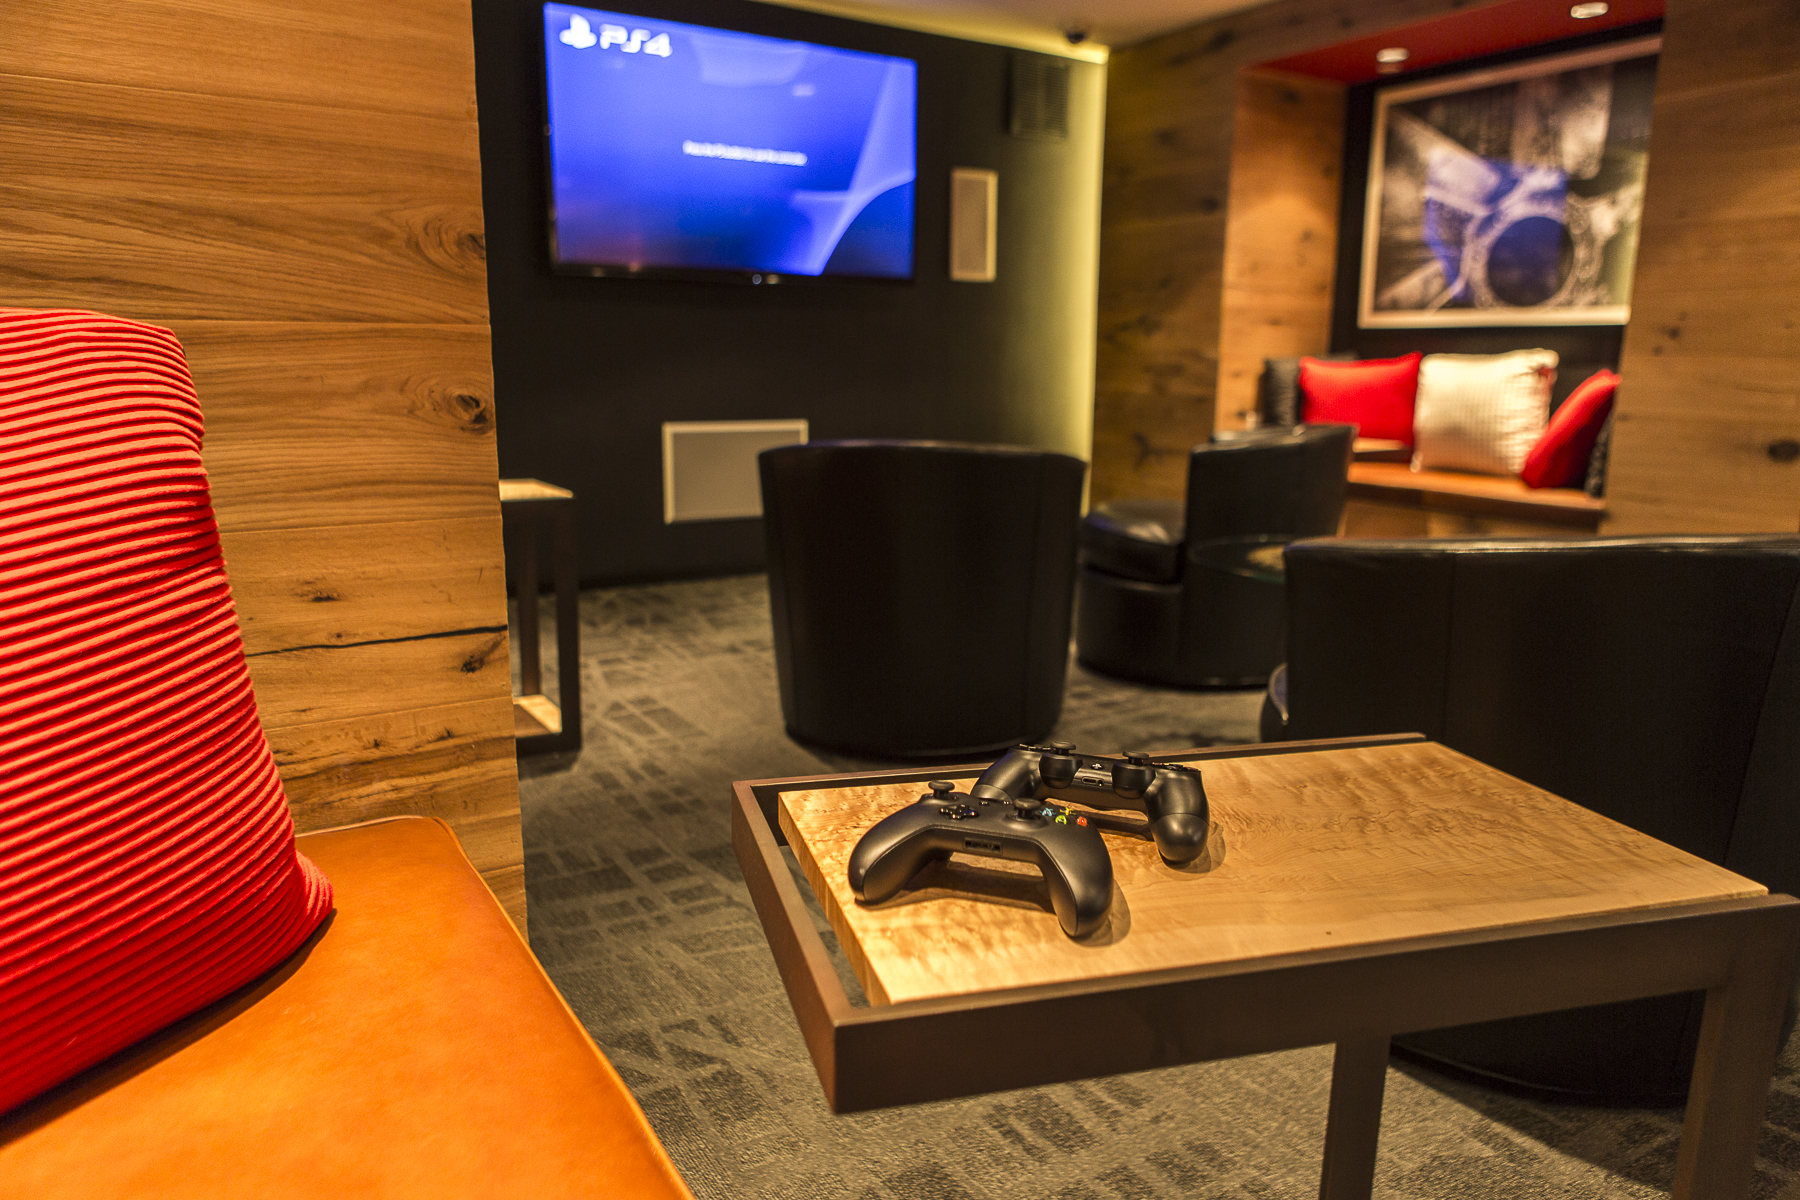 PLAY, a Game Room with both XBox One and PlayStation 4 consoles and a 70-inch flat screen